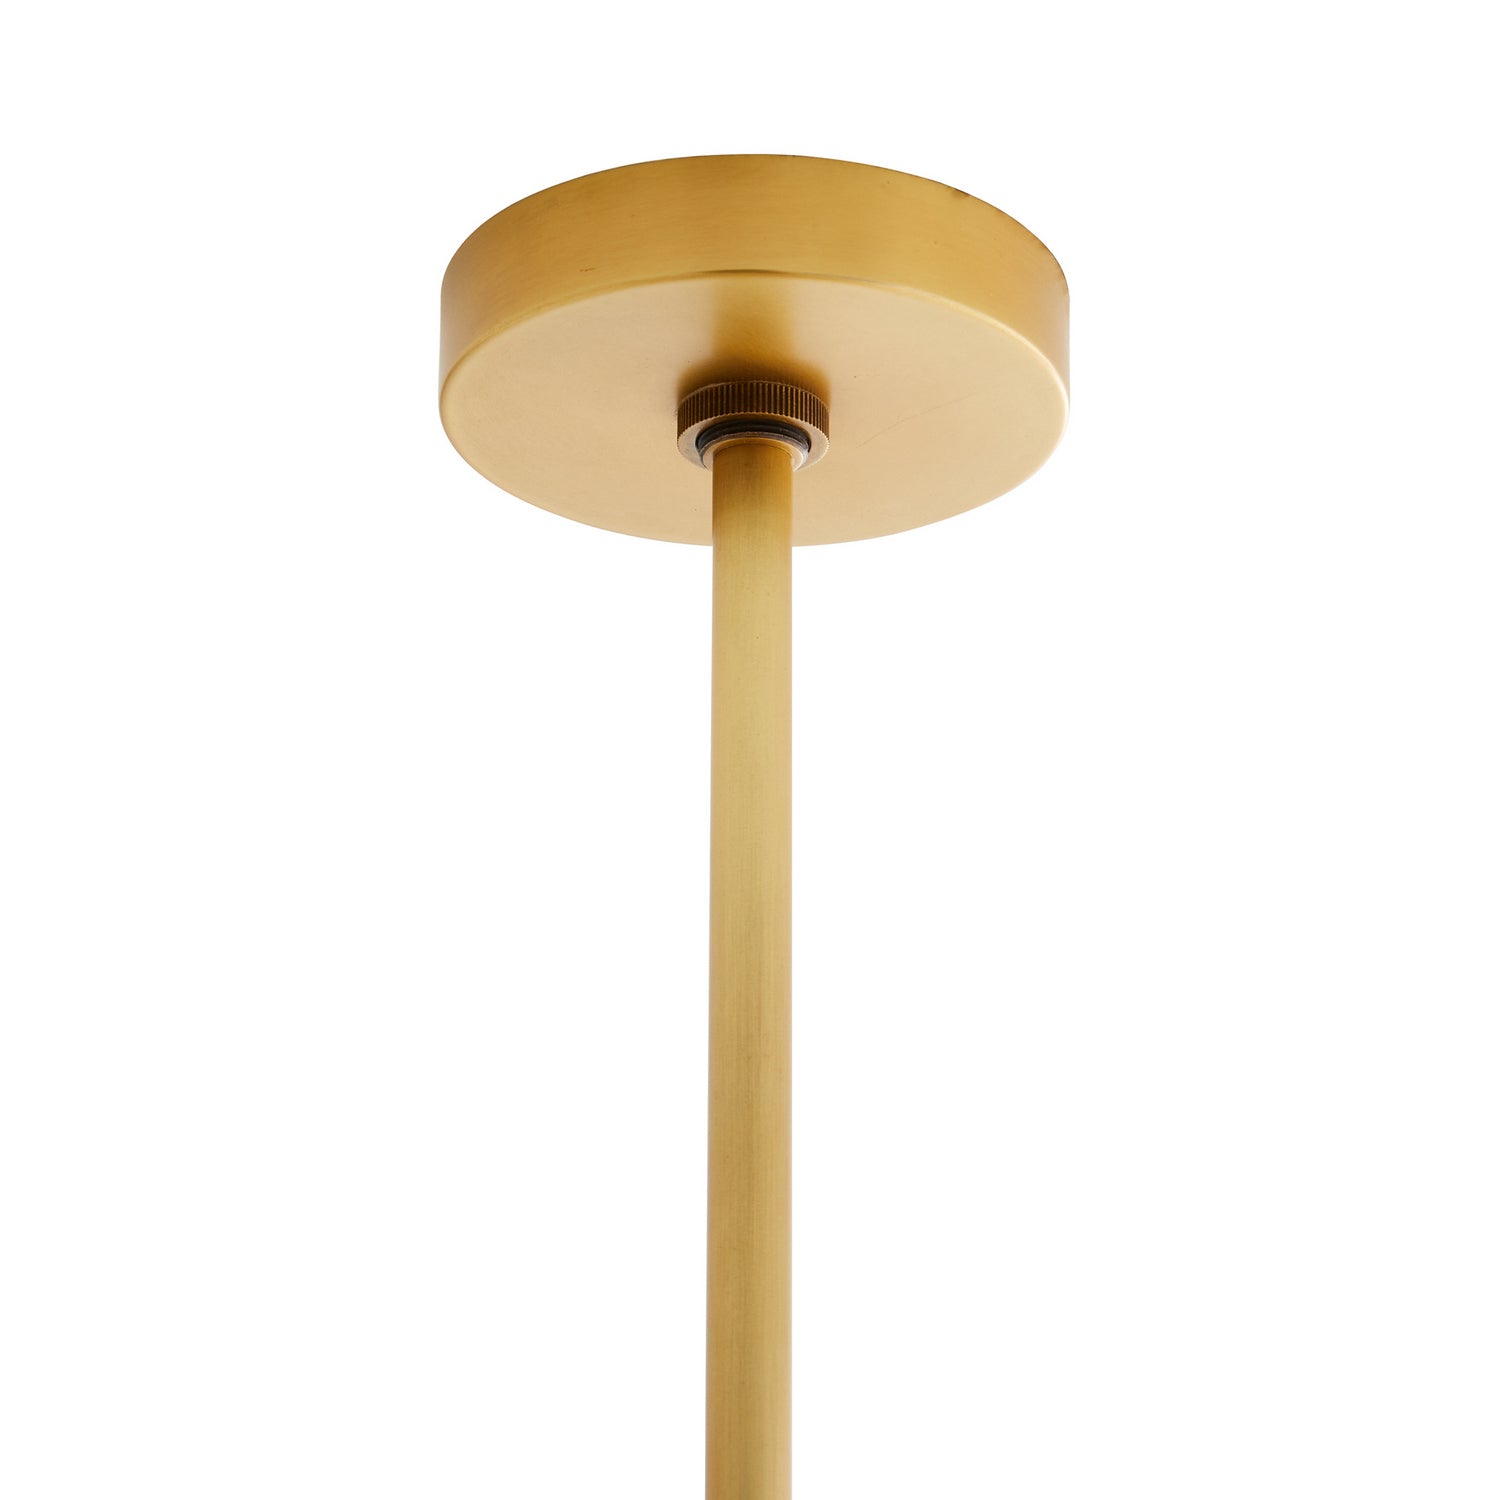 One Light Chandelier from the Mira collection in Antique Brass finish